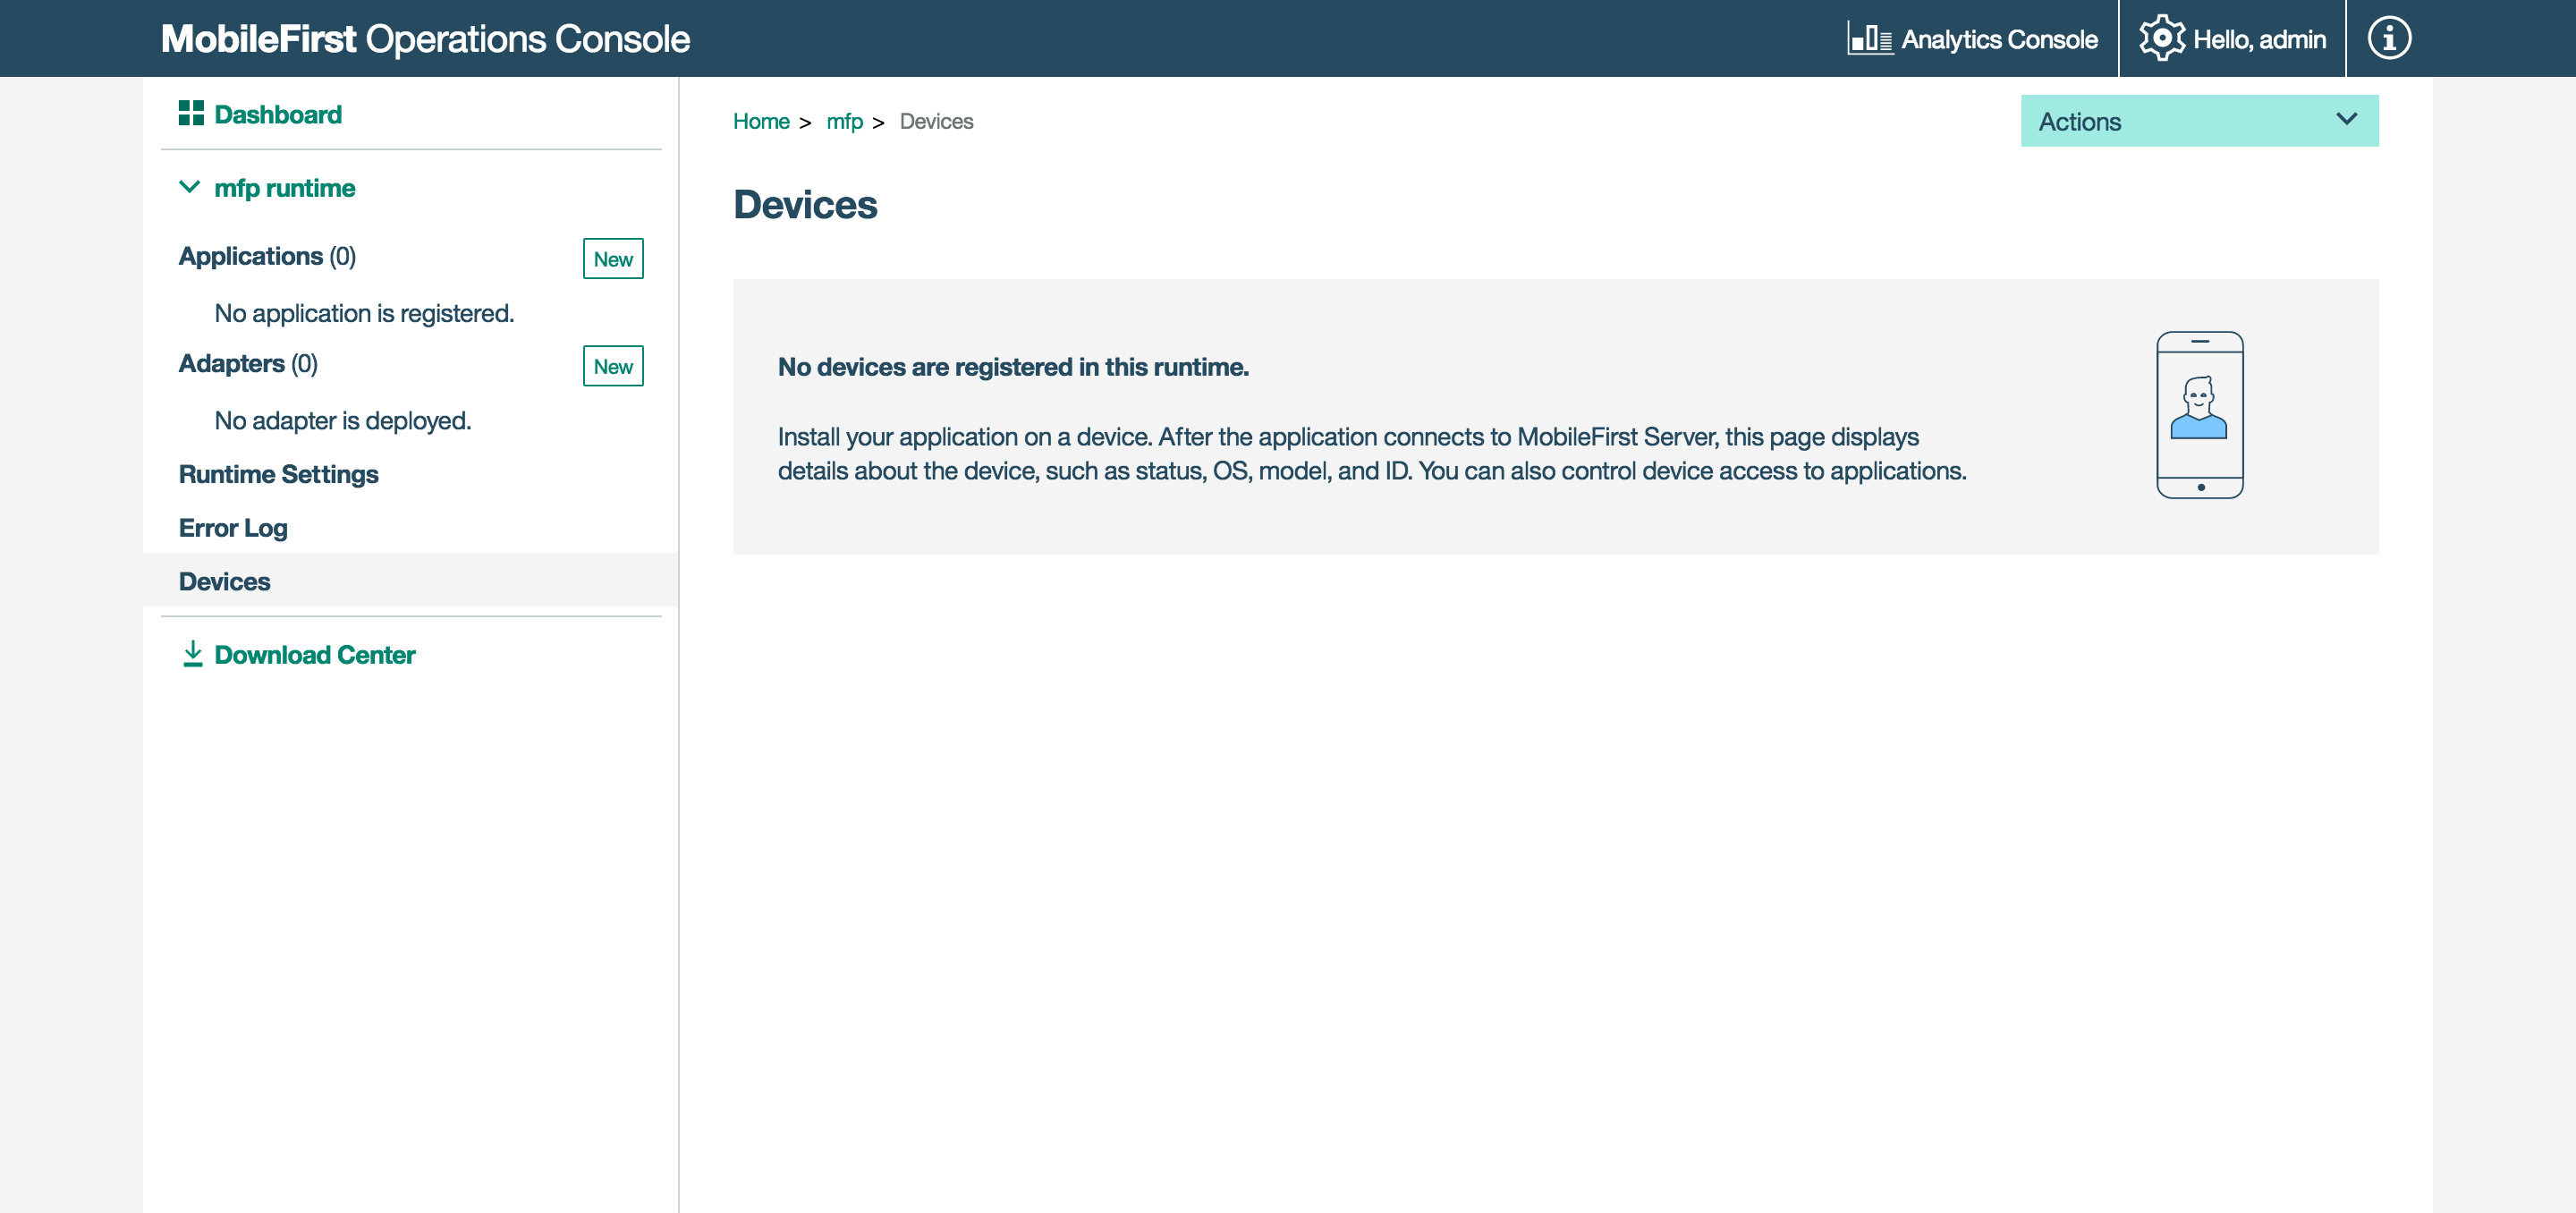 Image of device management screen